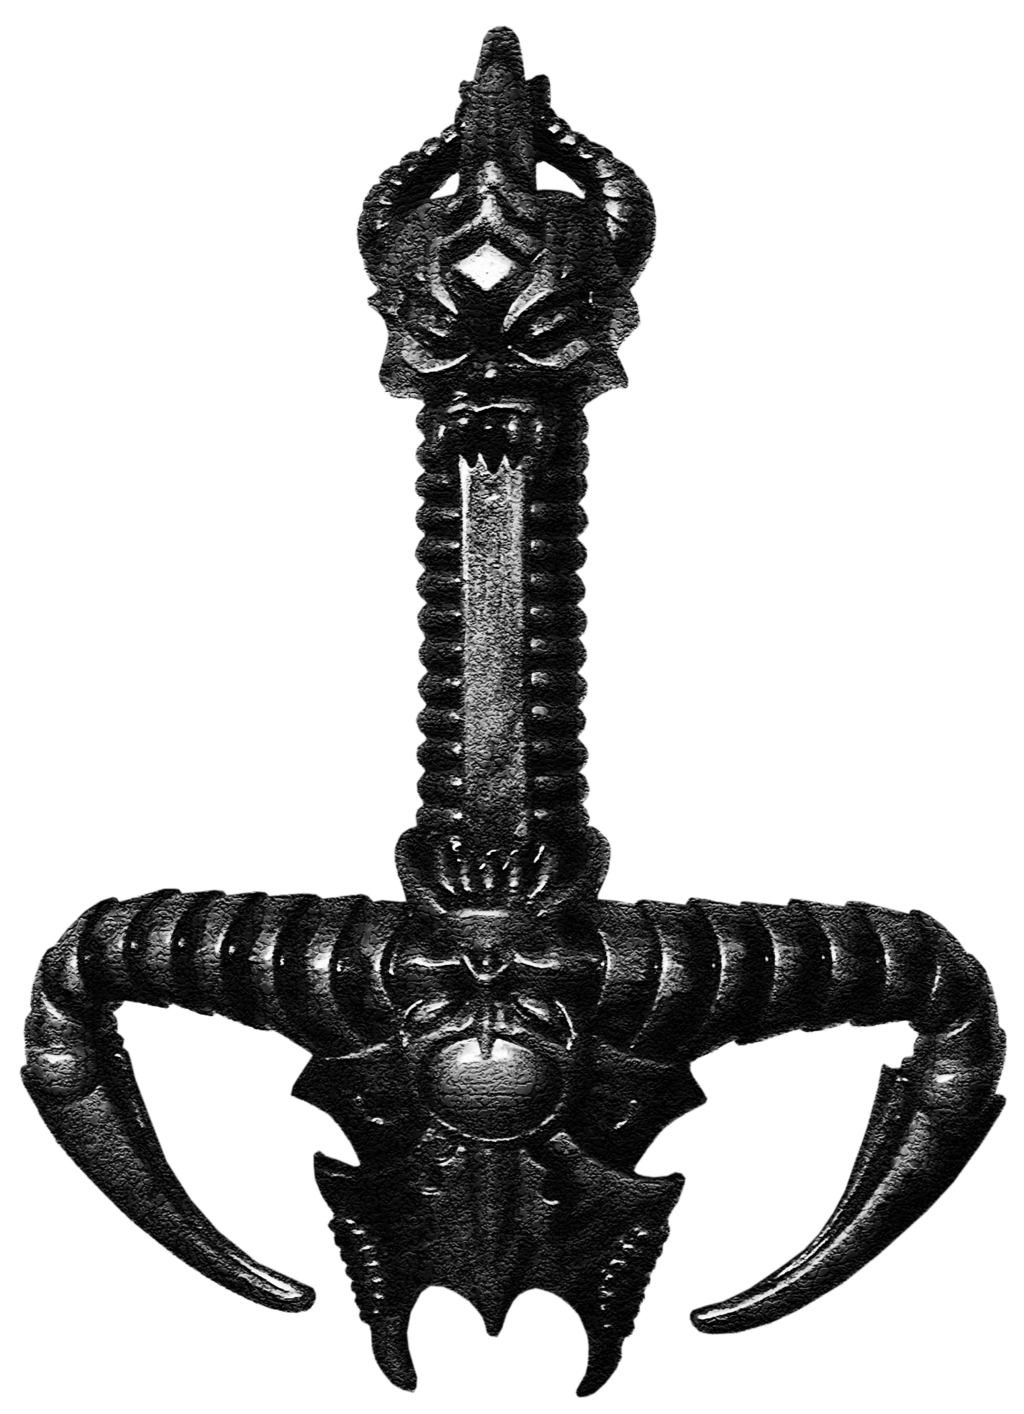 Handle e hb by. Clipart sword iron sword